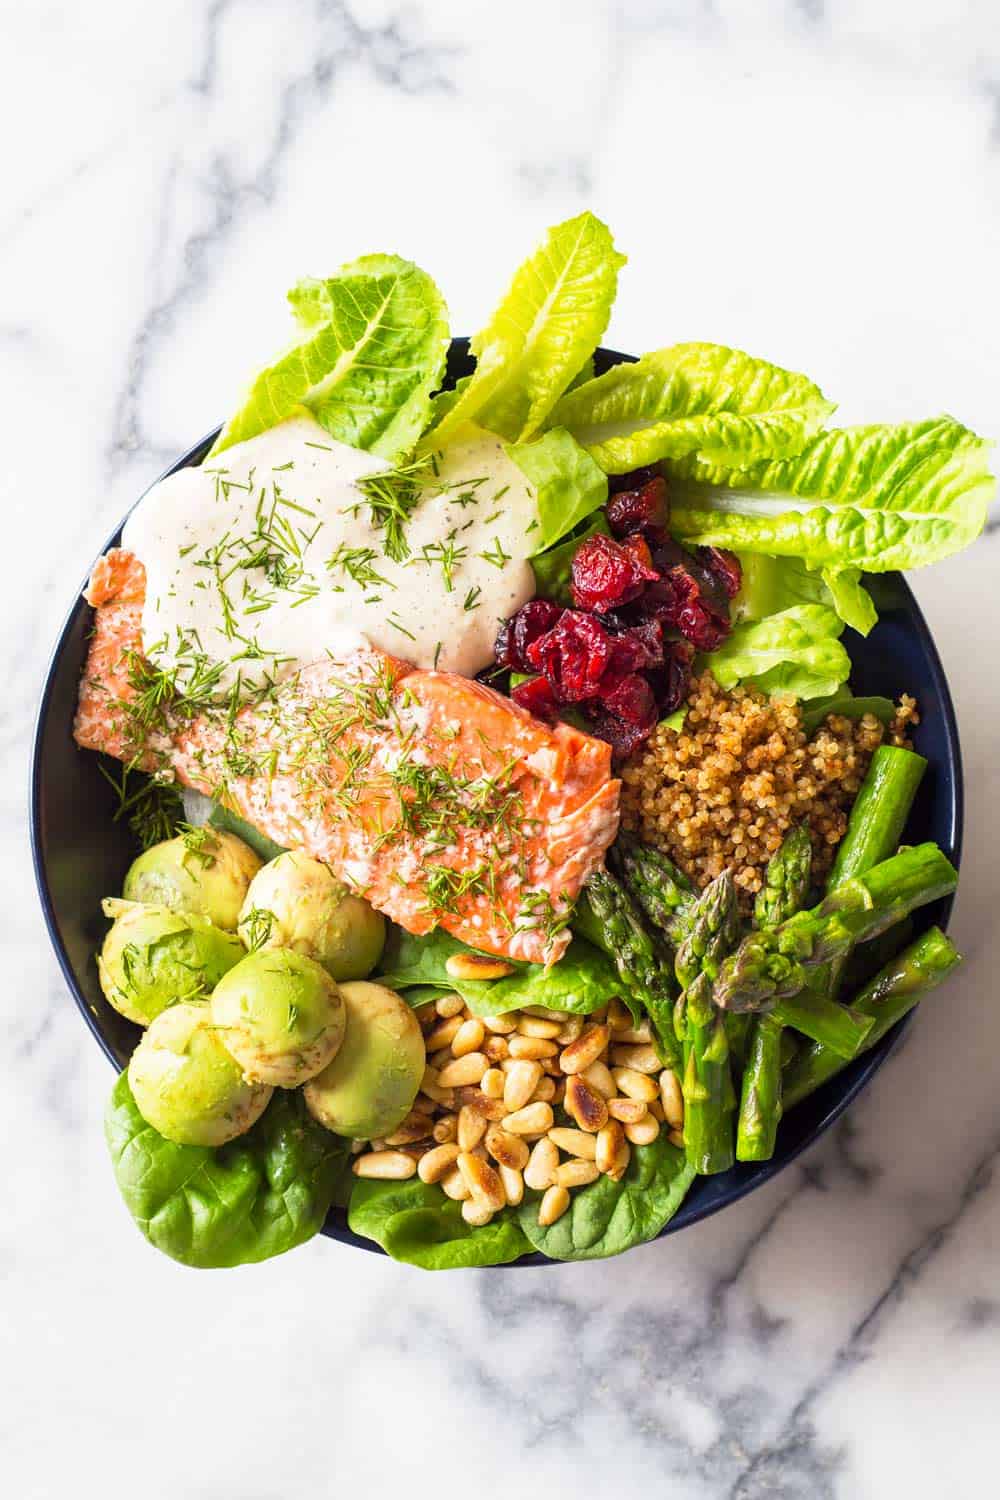 Sockeye Salmon is hands down the best fish in the whole wide world. Pair it with lettuce, asparagus, pine nuts, cranberries and avocado, drizzle the best salad dressing ever on it and you've just made yourself the best Sockeye Salmon recipe ever!